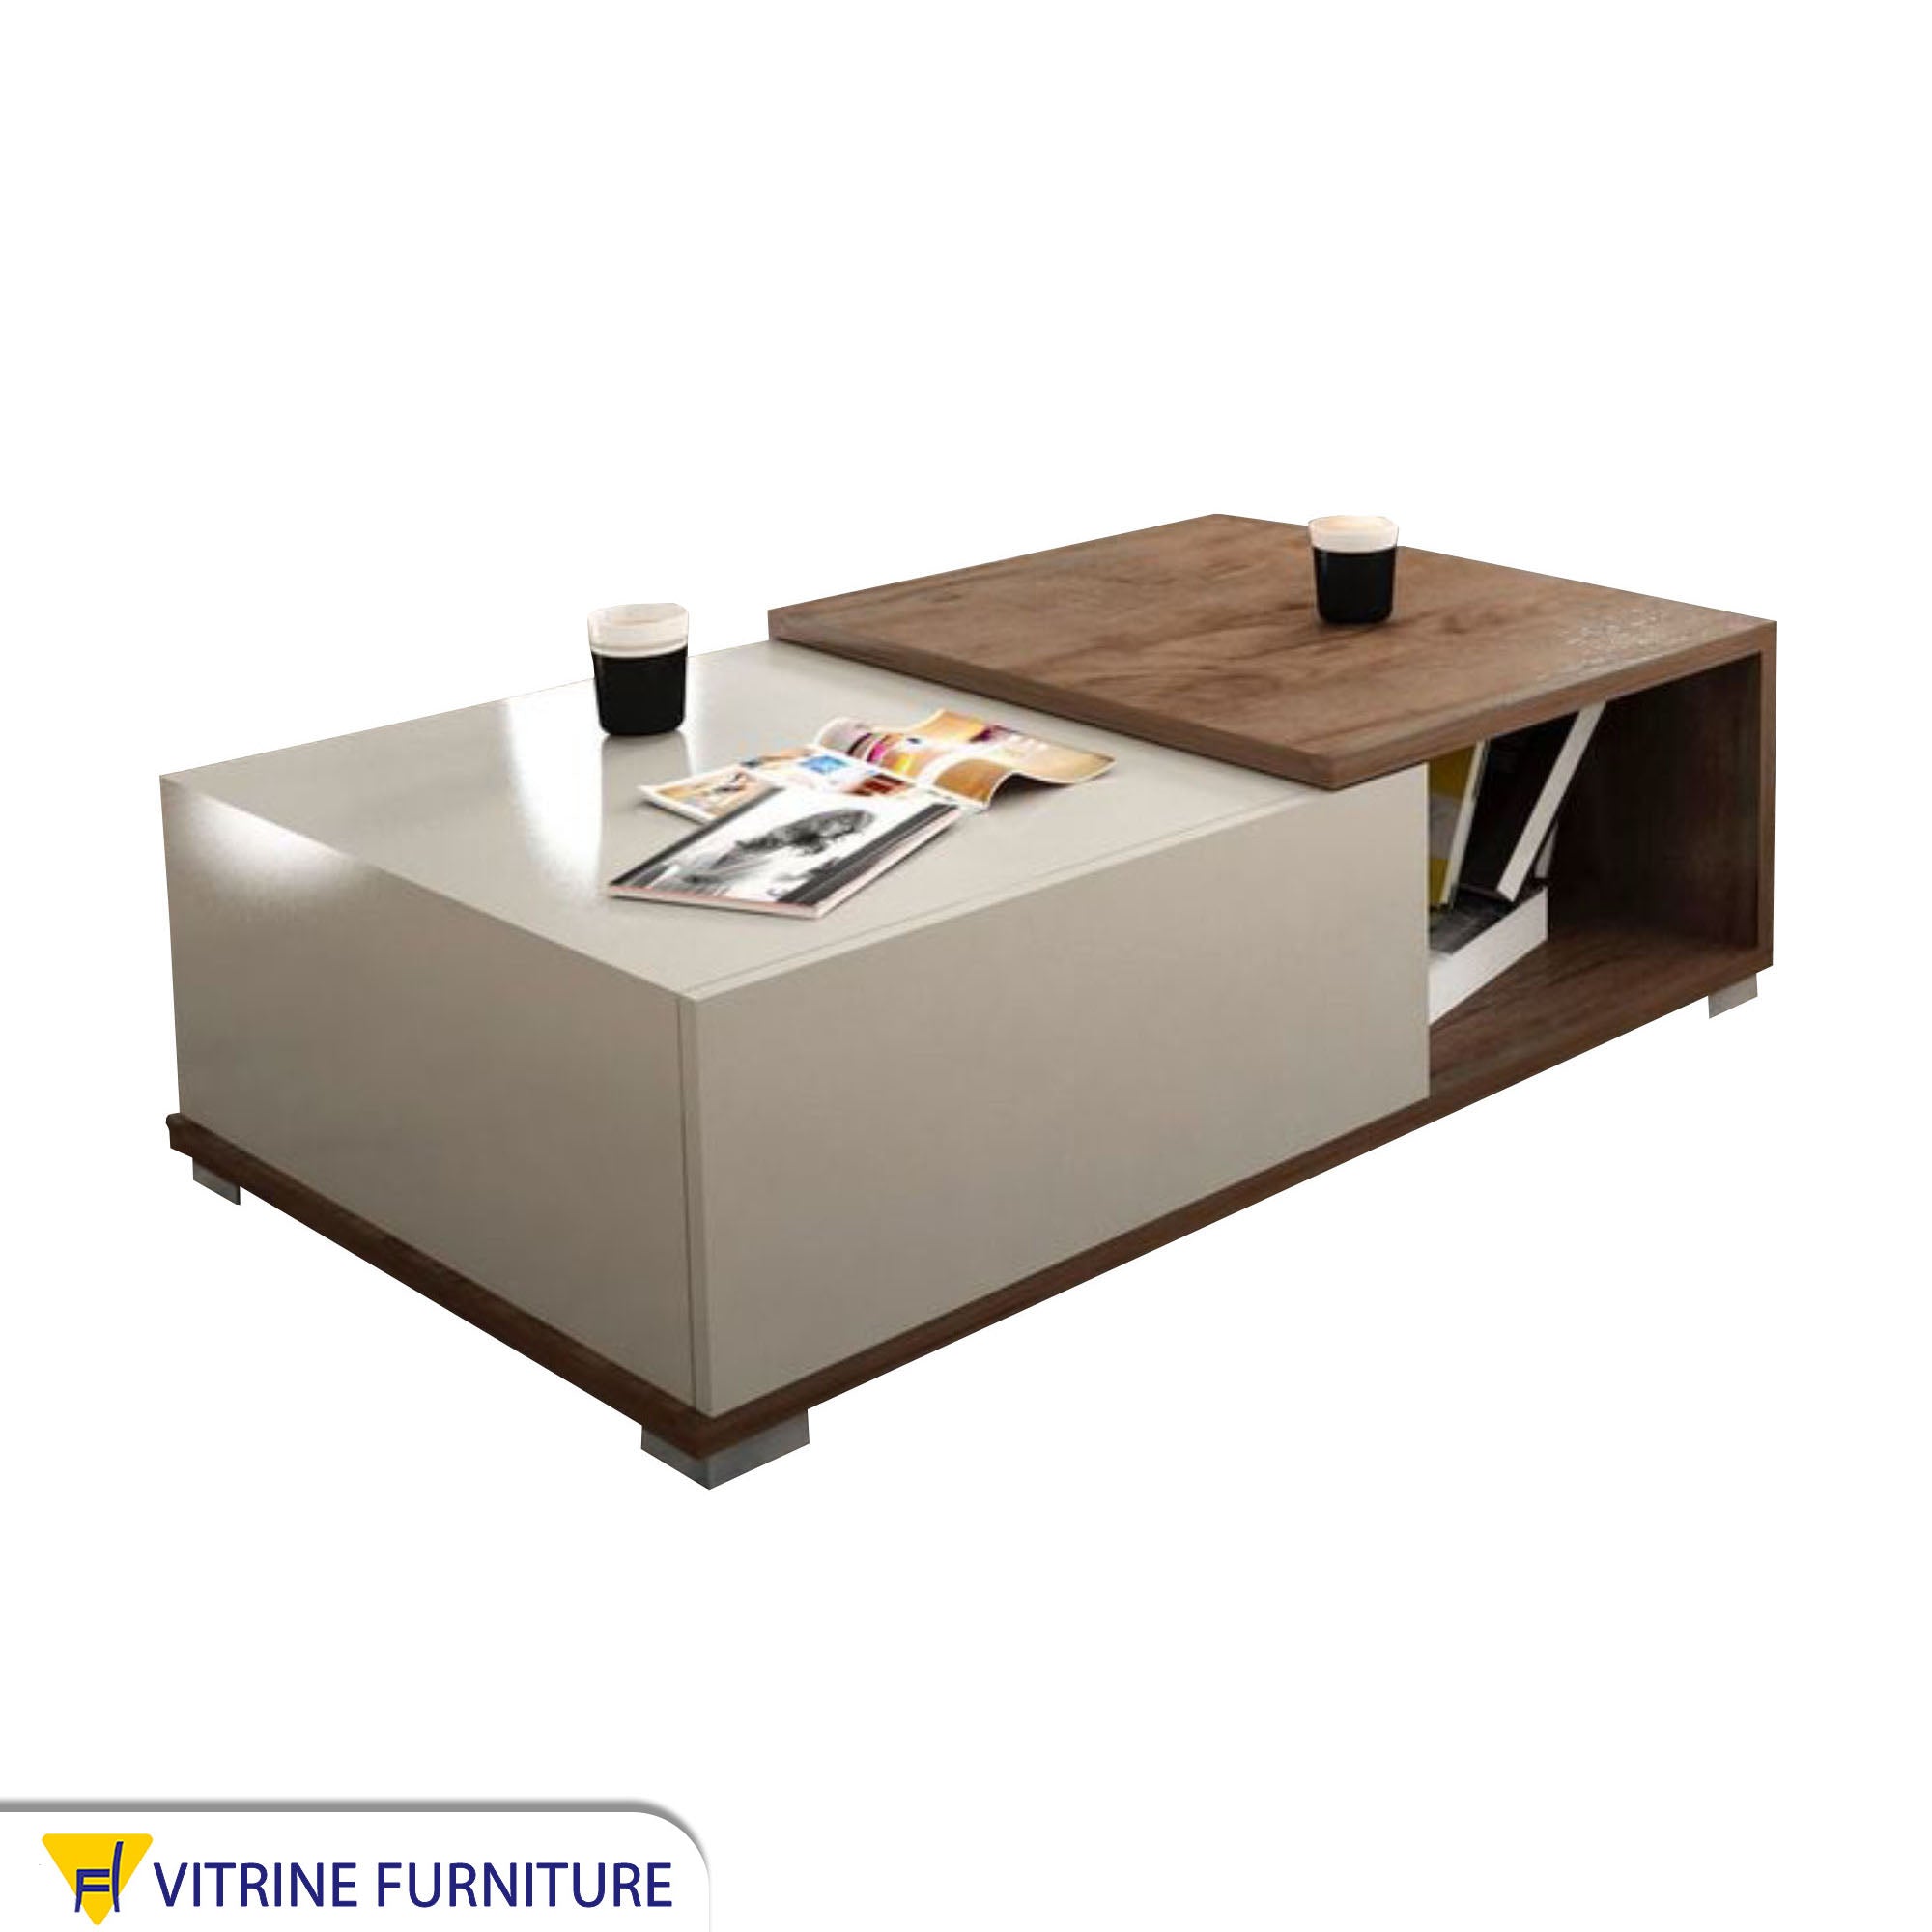 Center table in white and brown